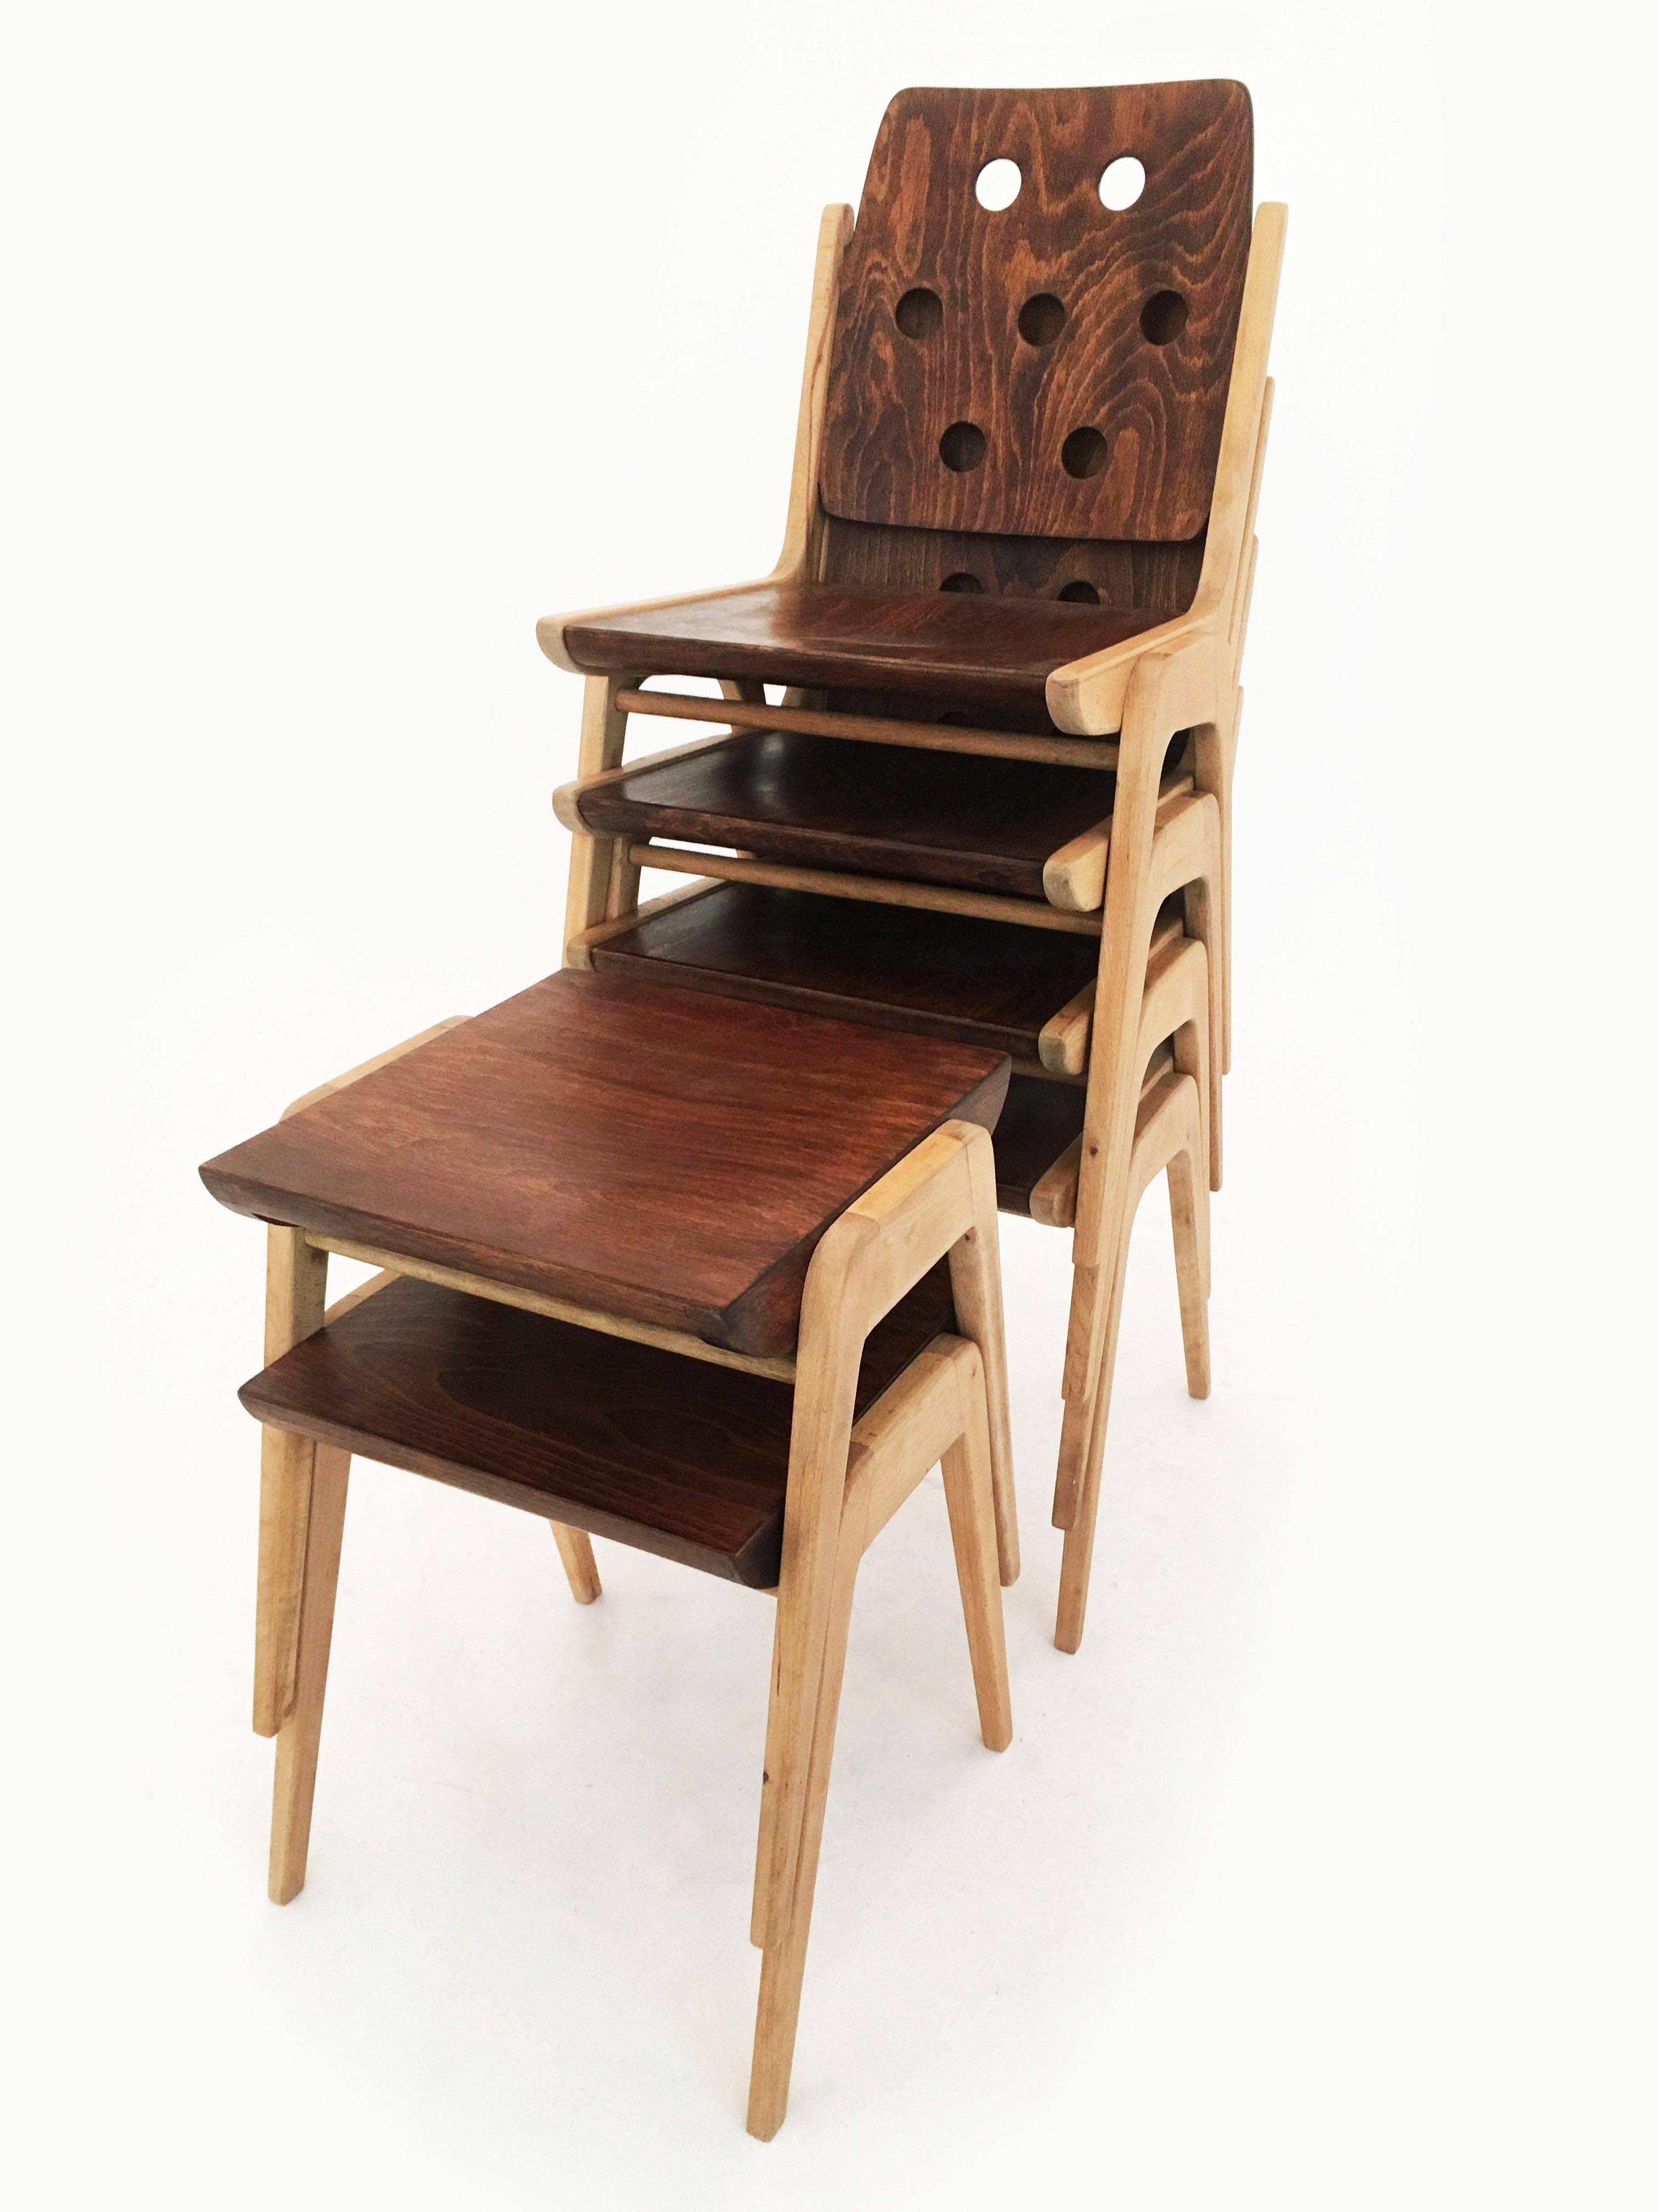 Franz Schuster Stacking Stools Pair, Austria, 1950s For Sale 2